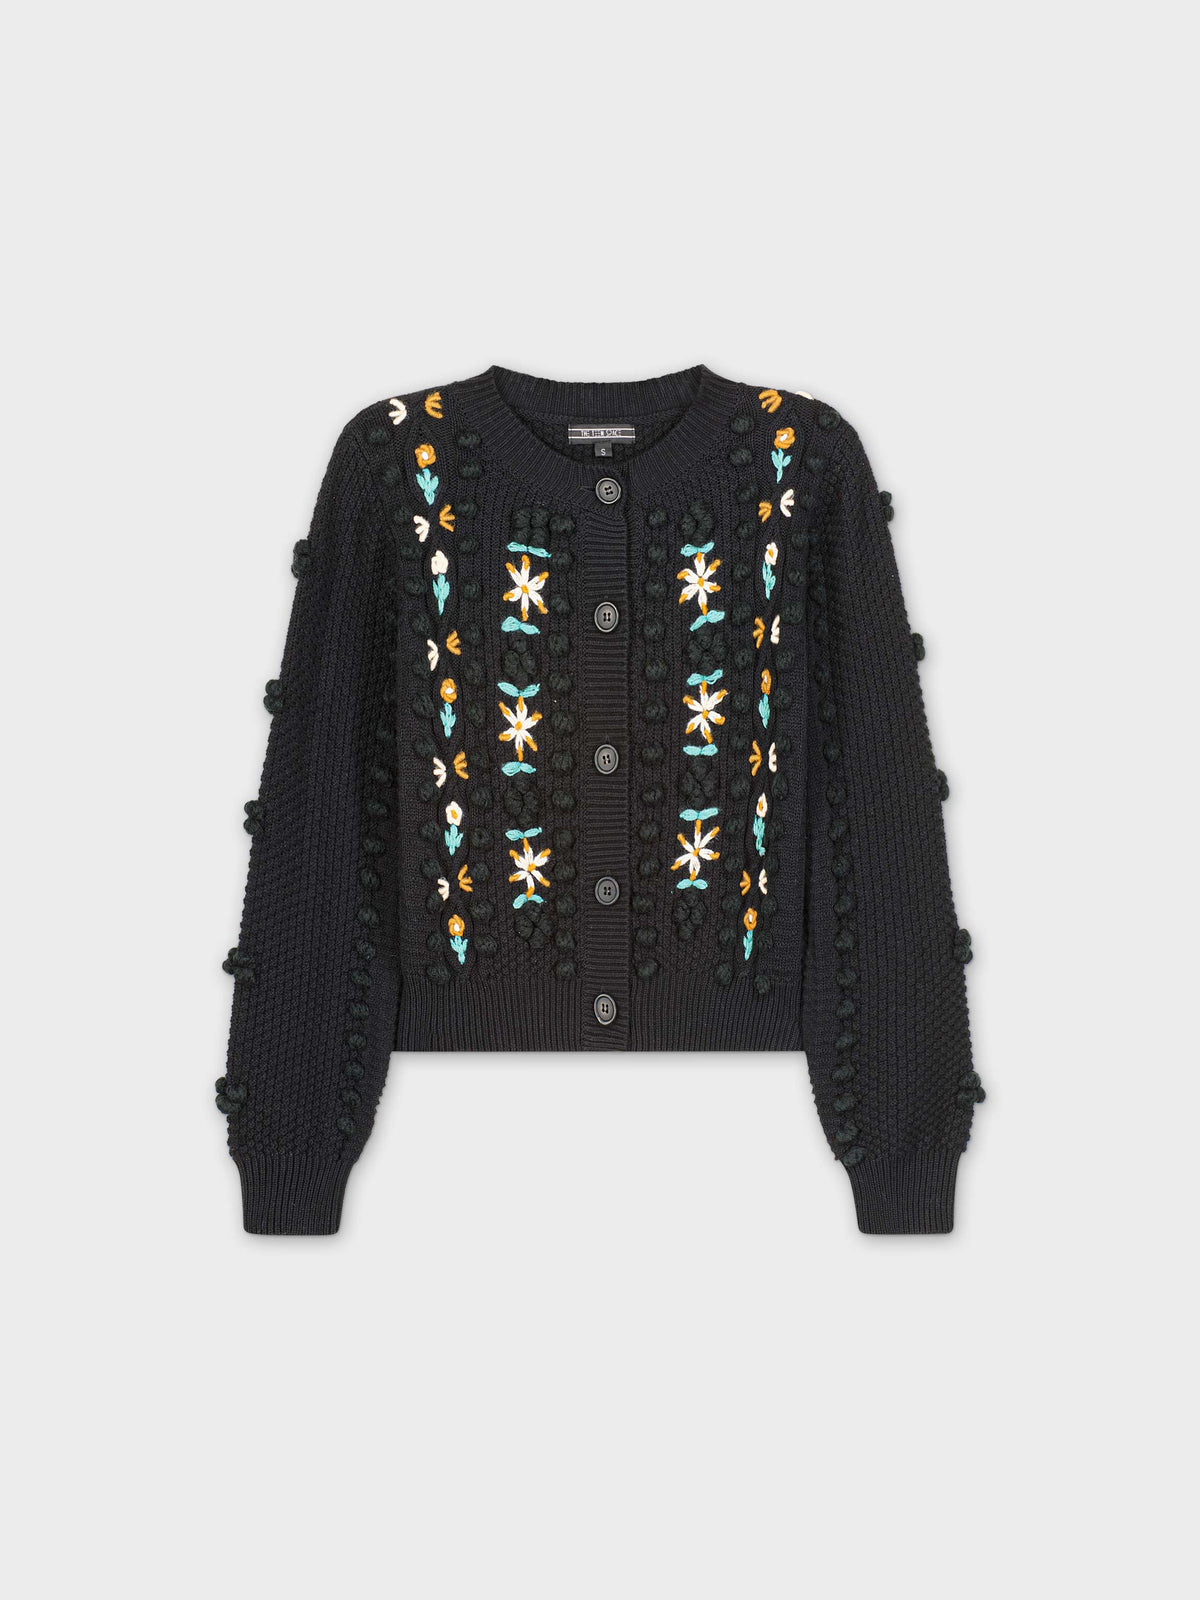 FLORAL EMBROIDERED CARDIGAN-BLACK/TURQUOISE